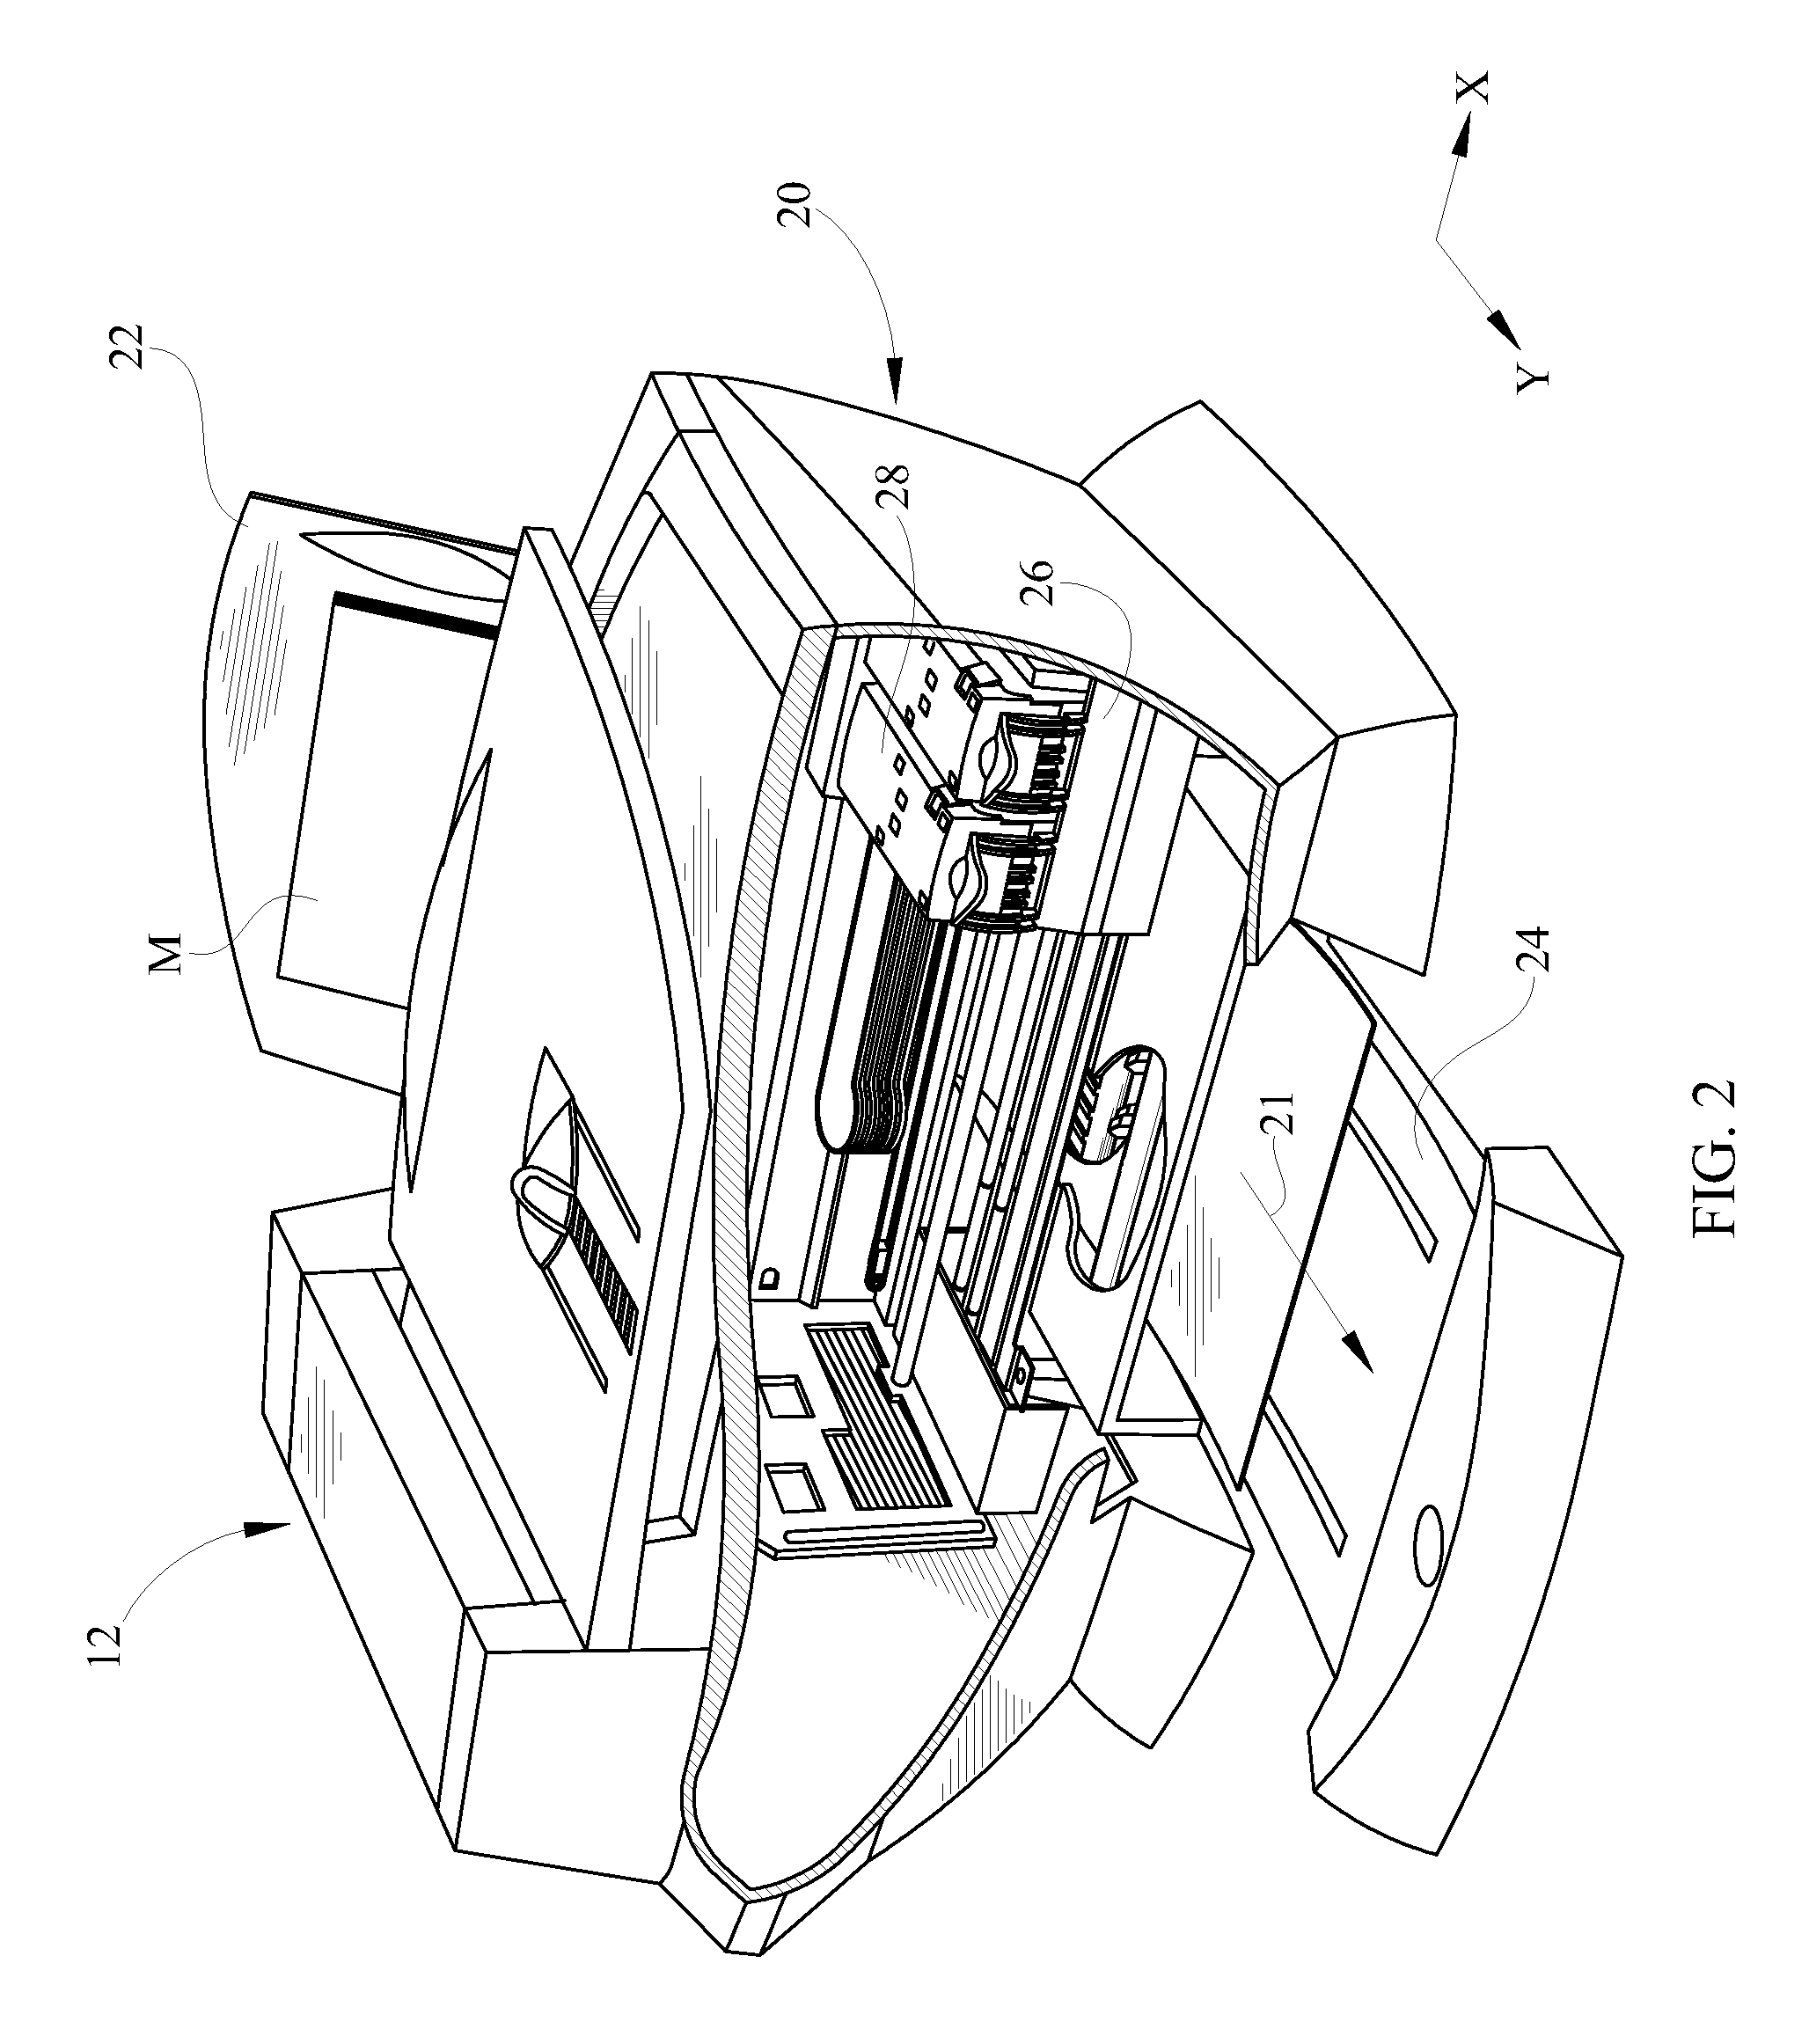 Trough support ribs and method of use